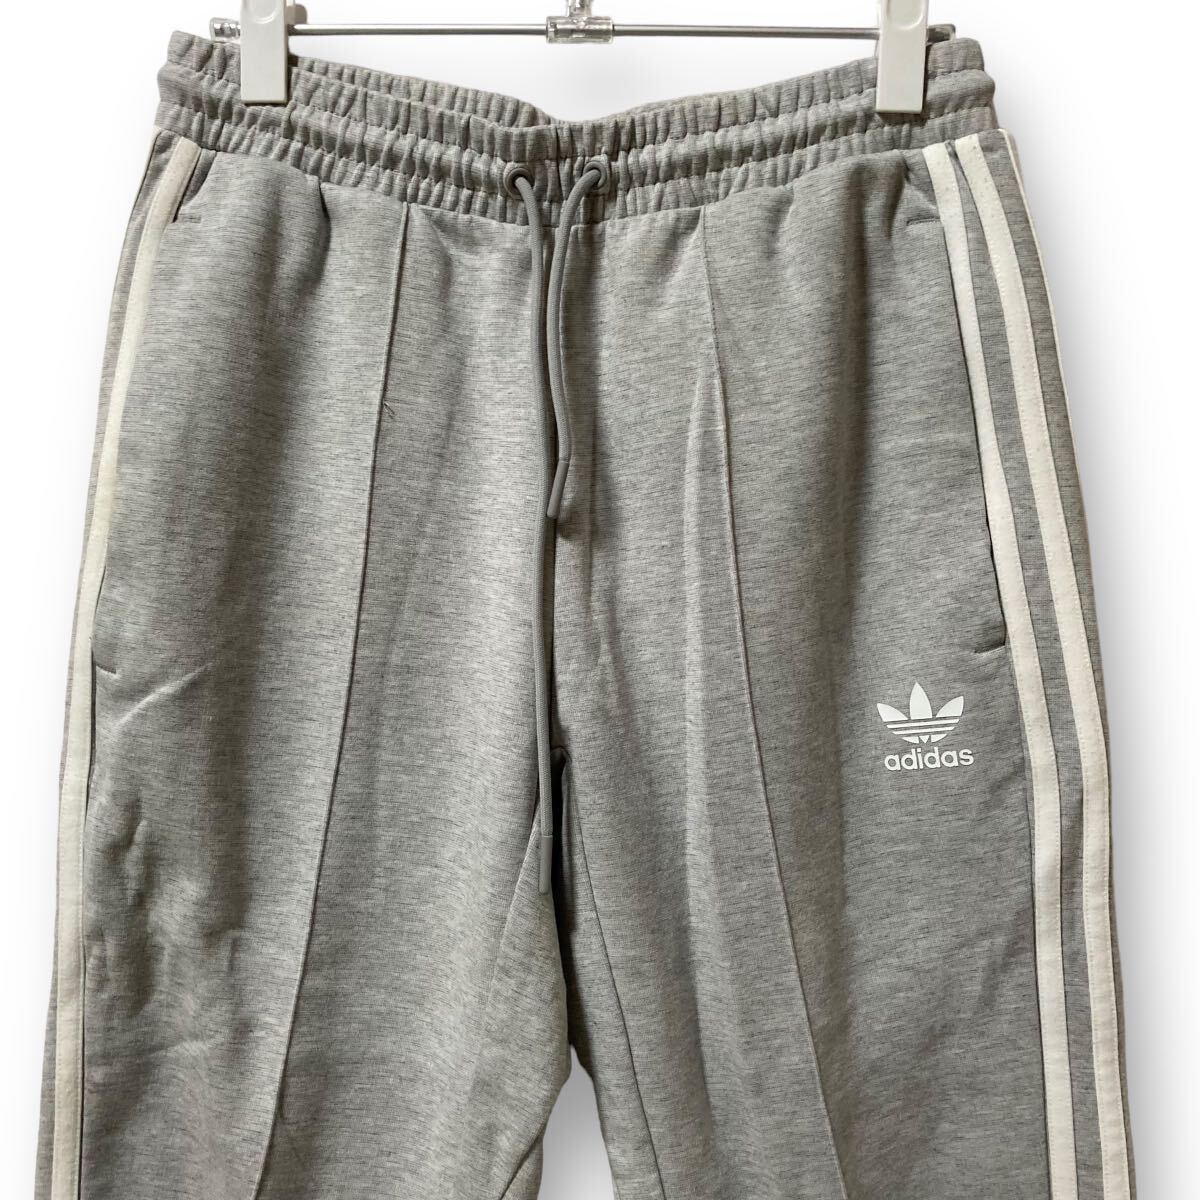 adidas Adidas 3ps.@ line sweat truck pants jersey .... height size L